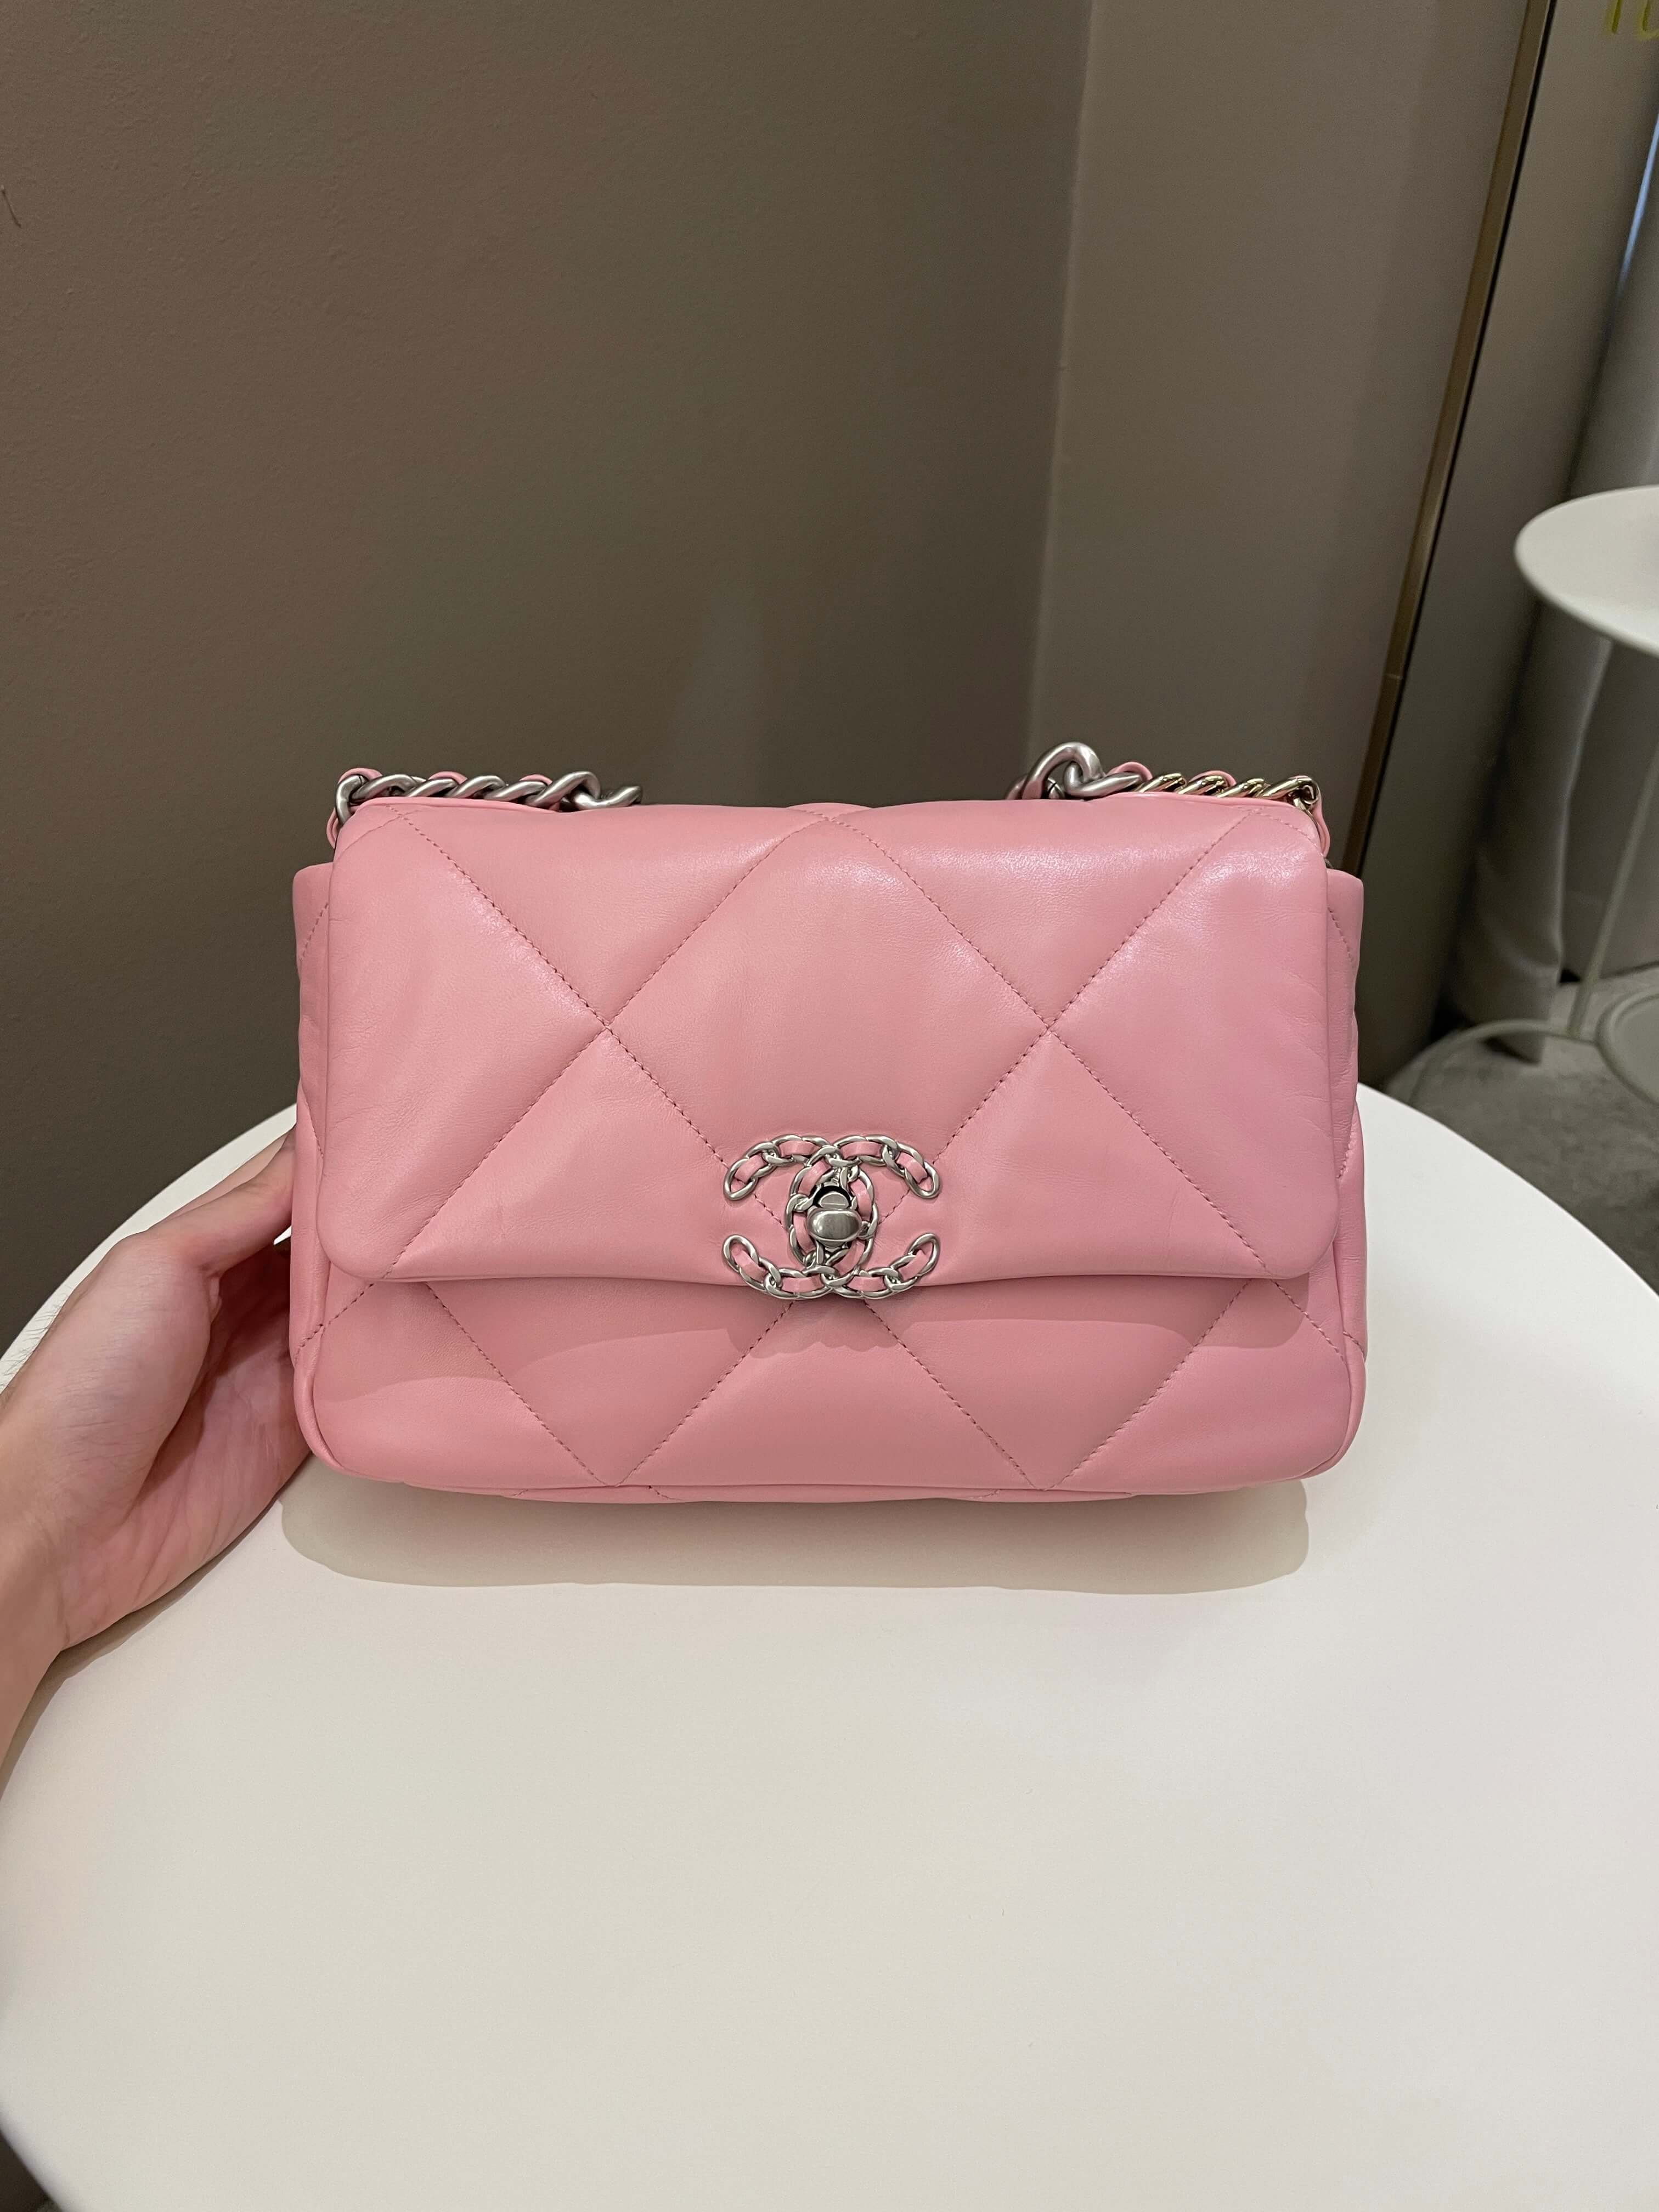 chanel business affinity flap bag